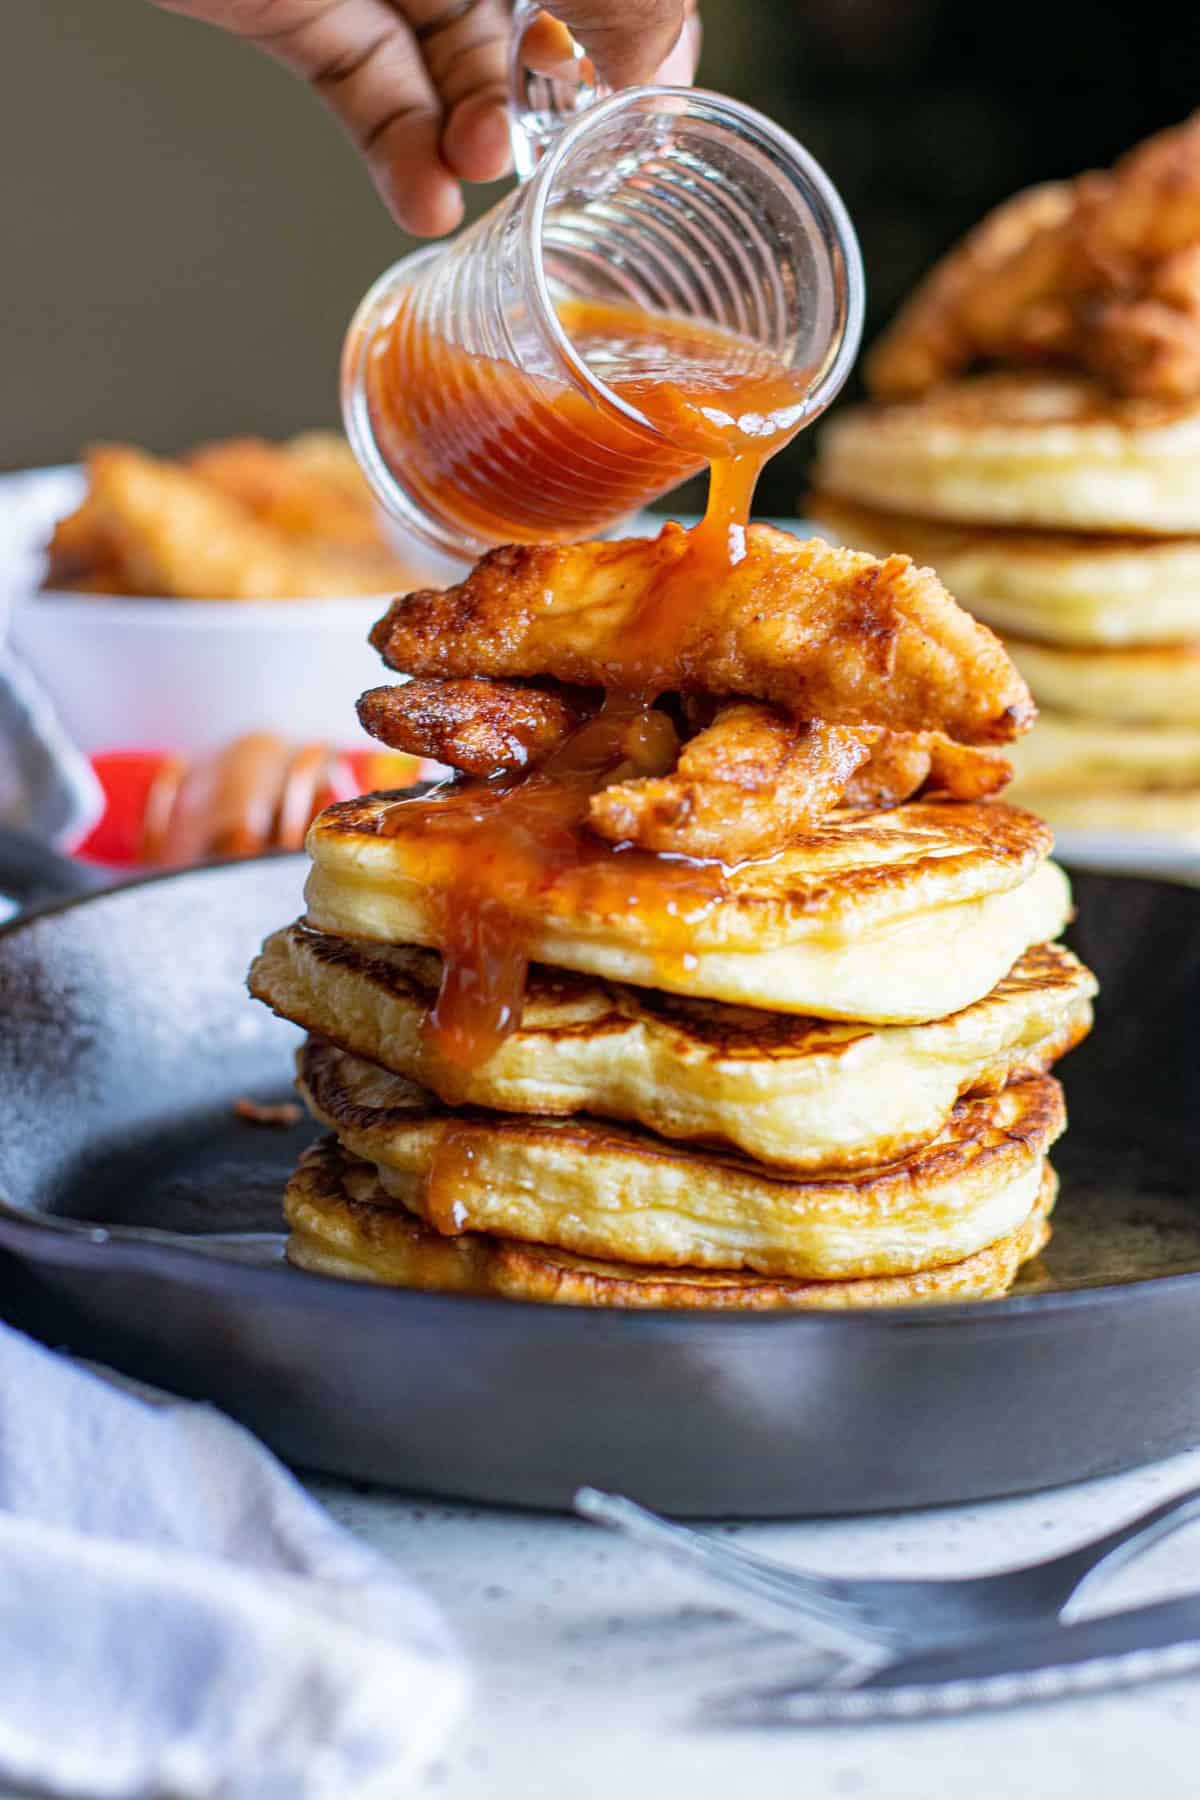 Sriracha maple sauce being poured on a stack of pancakes.